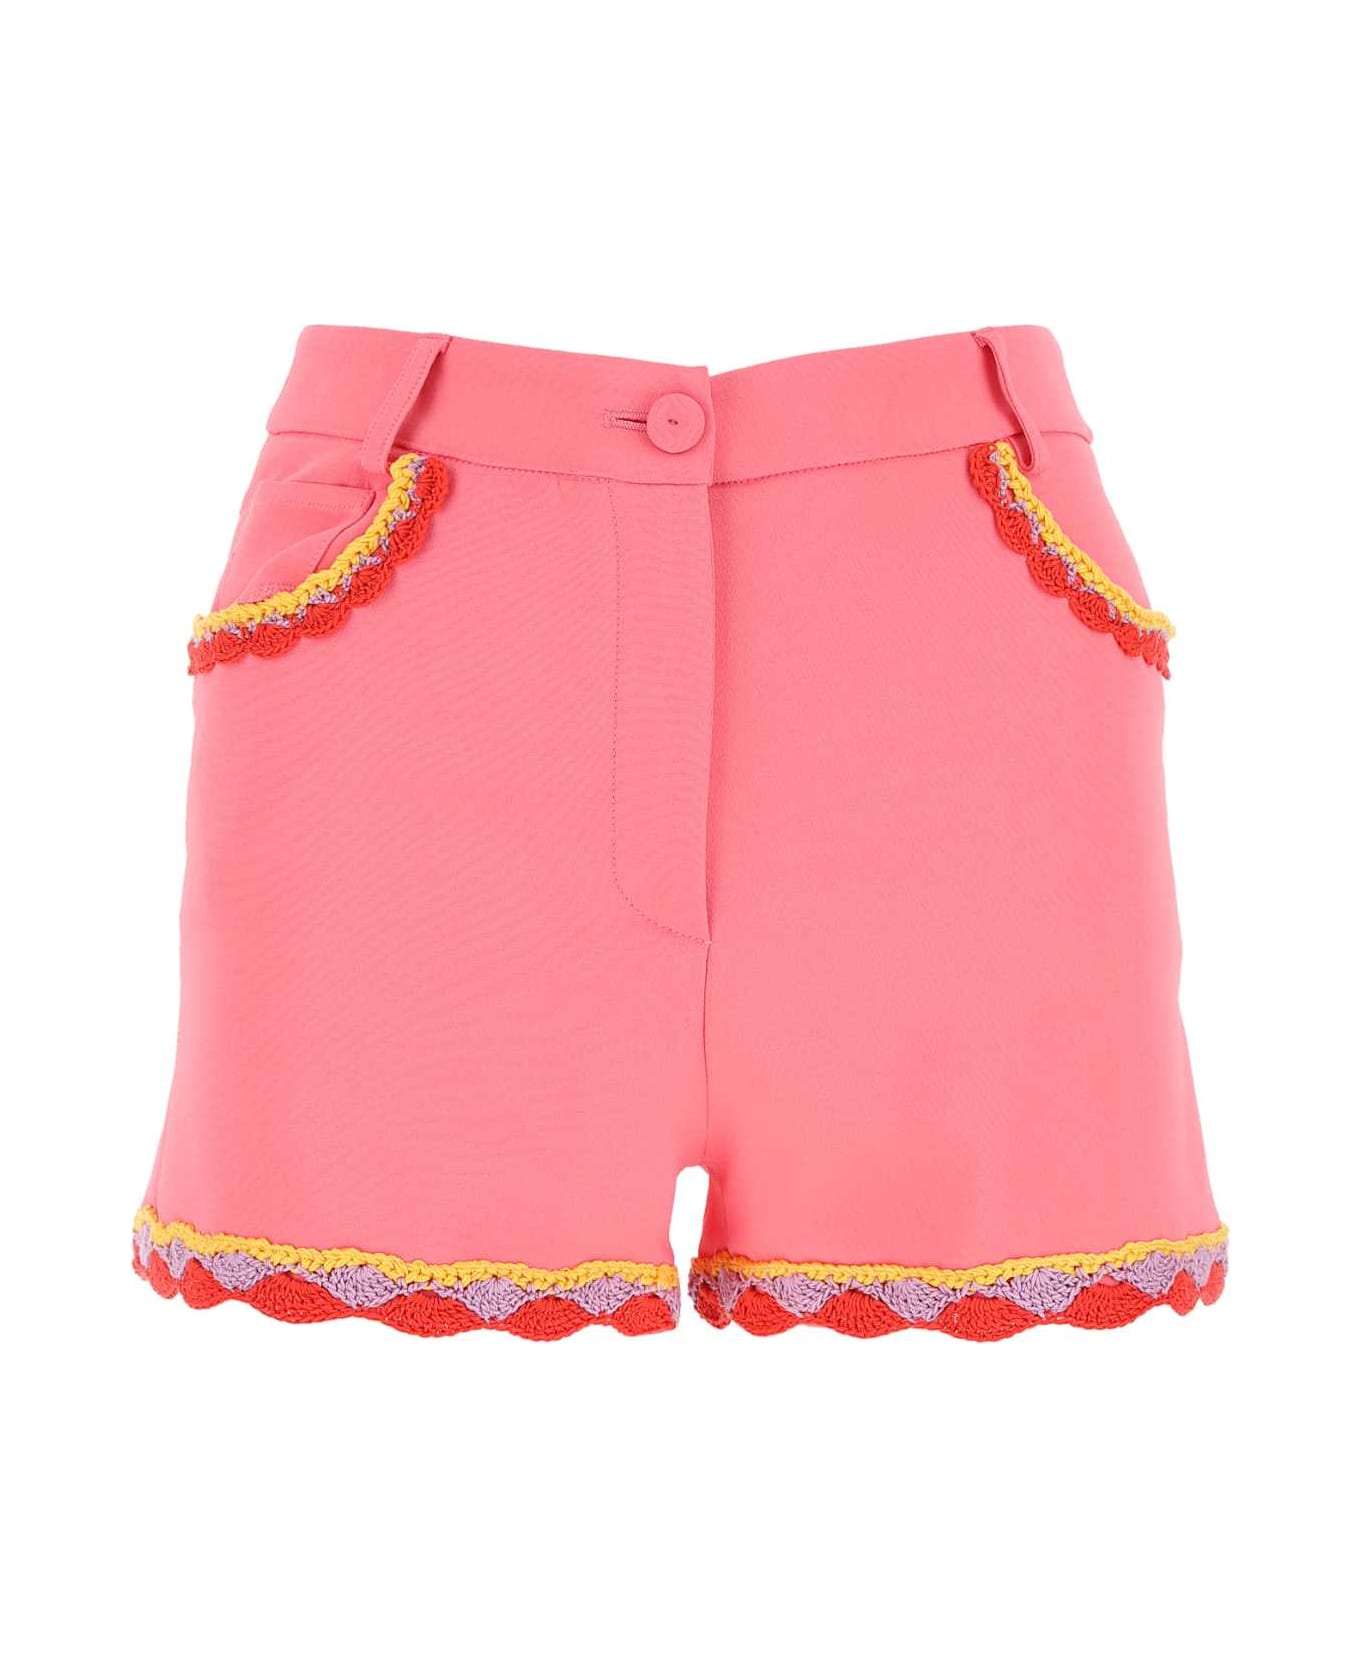 Moschino Pink Stretch Crepe Shorts - 1205